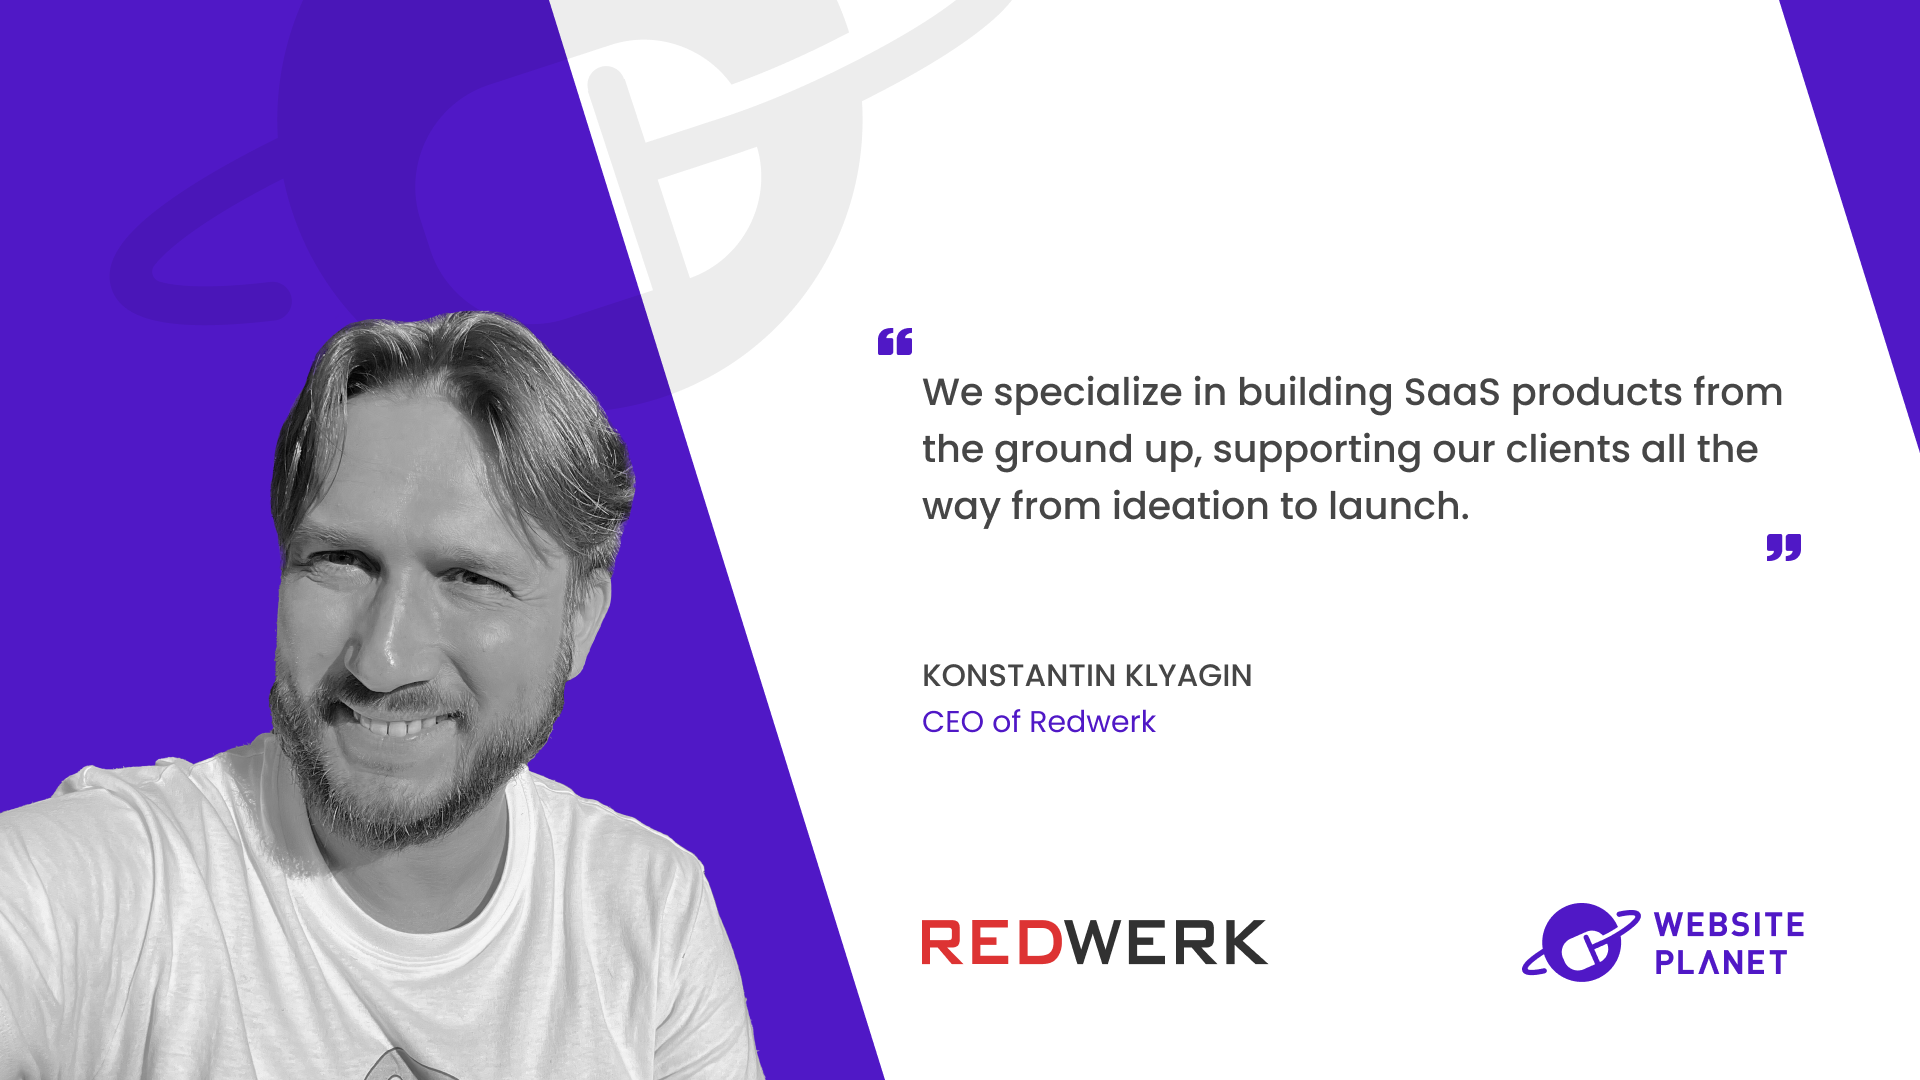 Website Planet interview with CEO of Redwerk